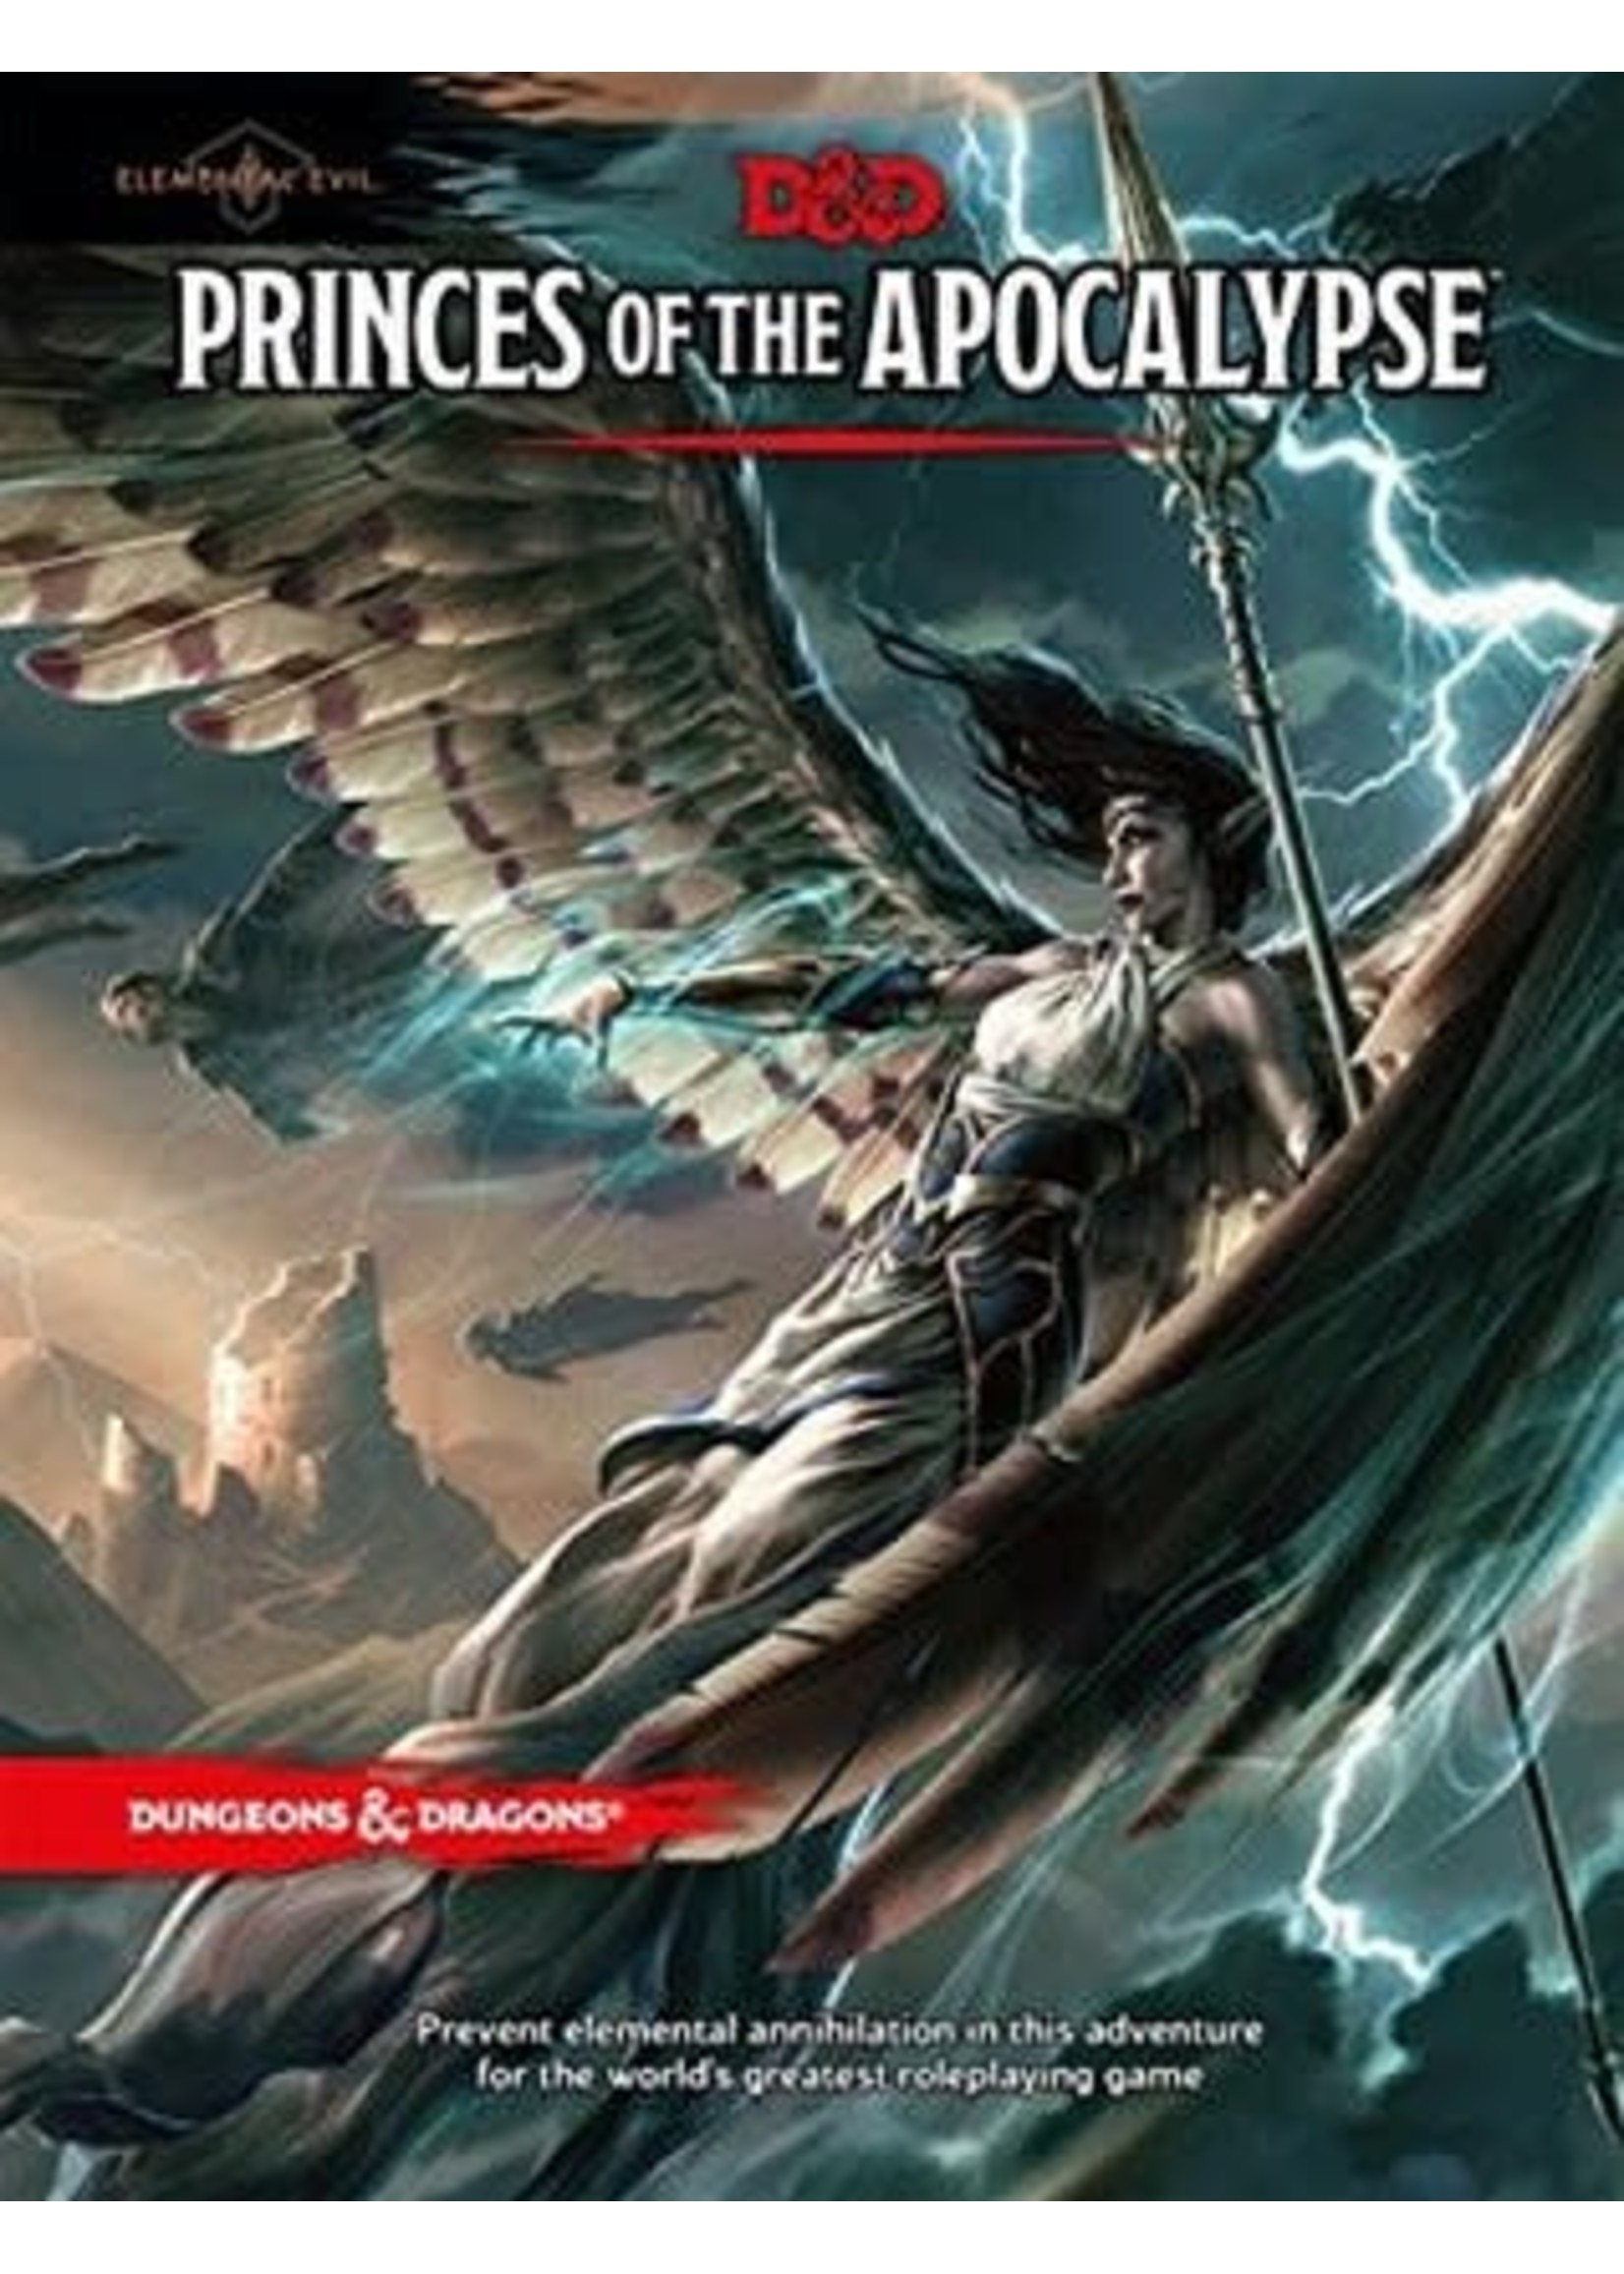 Princes of the Apocalypse (Dungeons & Dragons, 5th Edition) by Wizards of the Coast